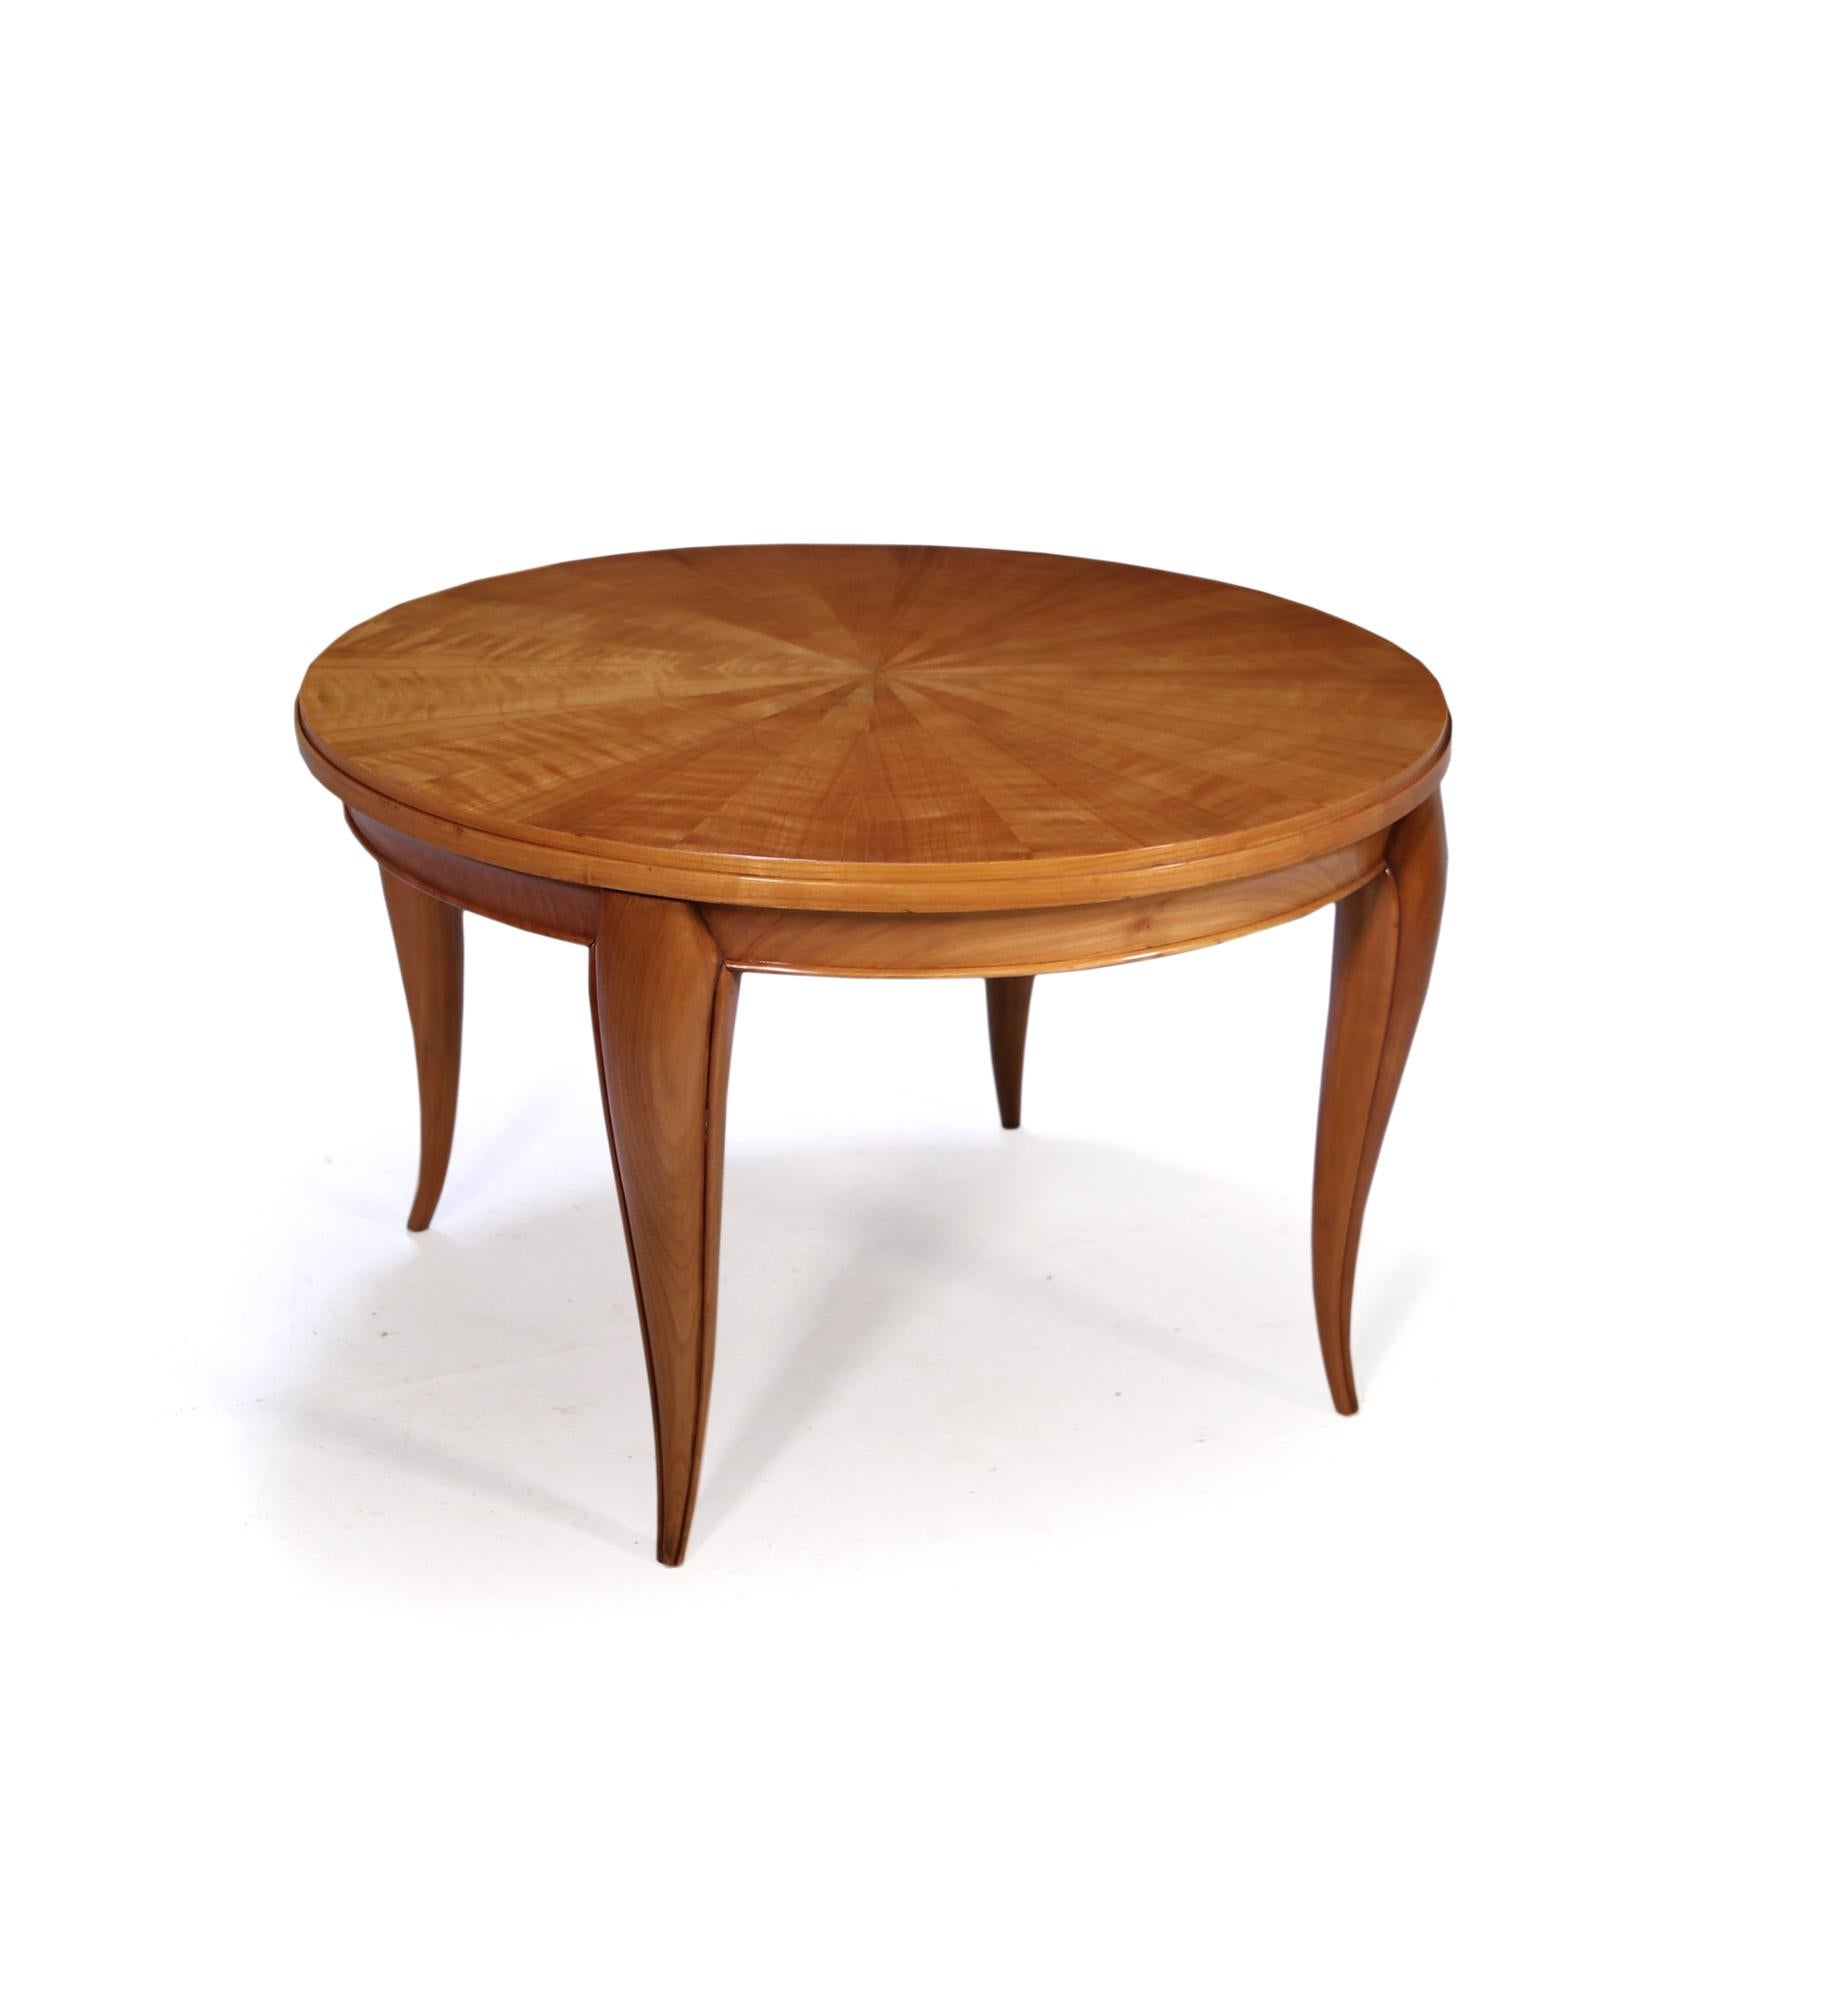 A stunning quality table produced in France in the 1920’s in cherrywood with segmented top, four very elegant cabriole legs the table has been fully polished by hand and in excellent condition throughout

Age: 1925

Style: Art Deco

Material: